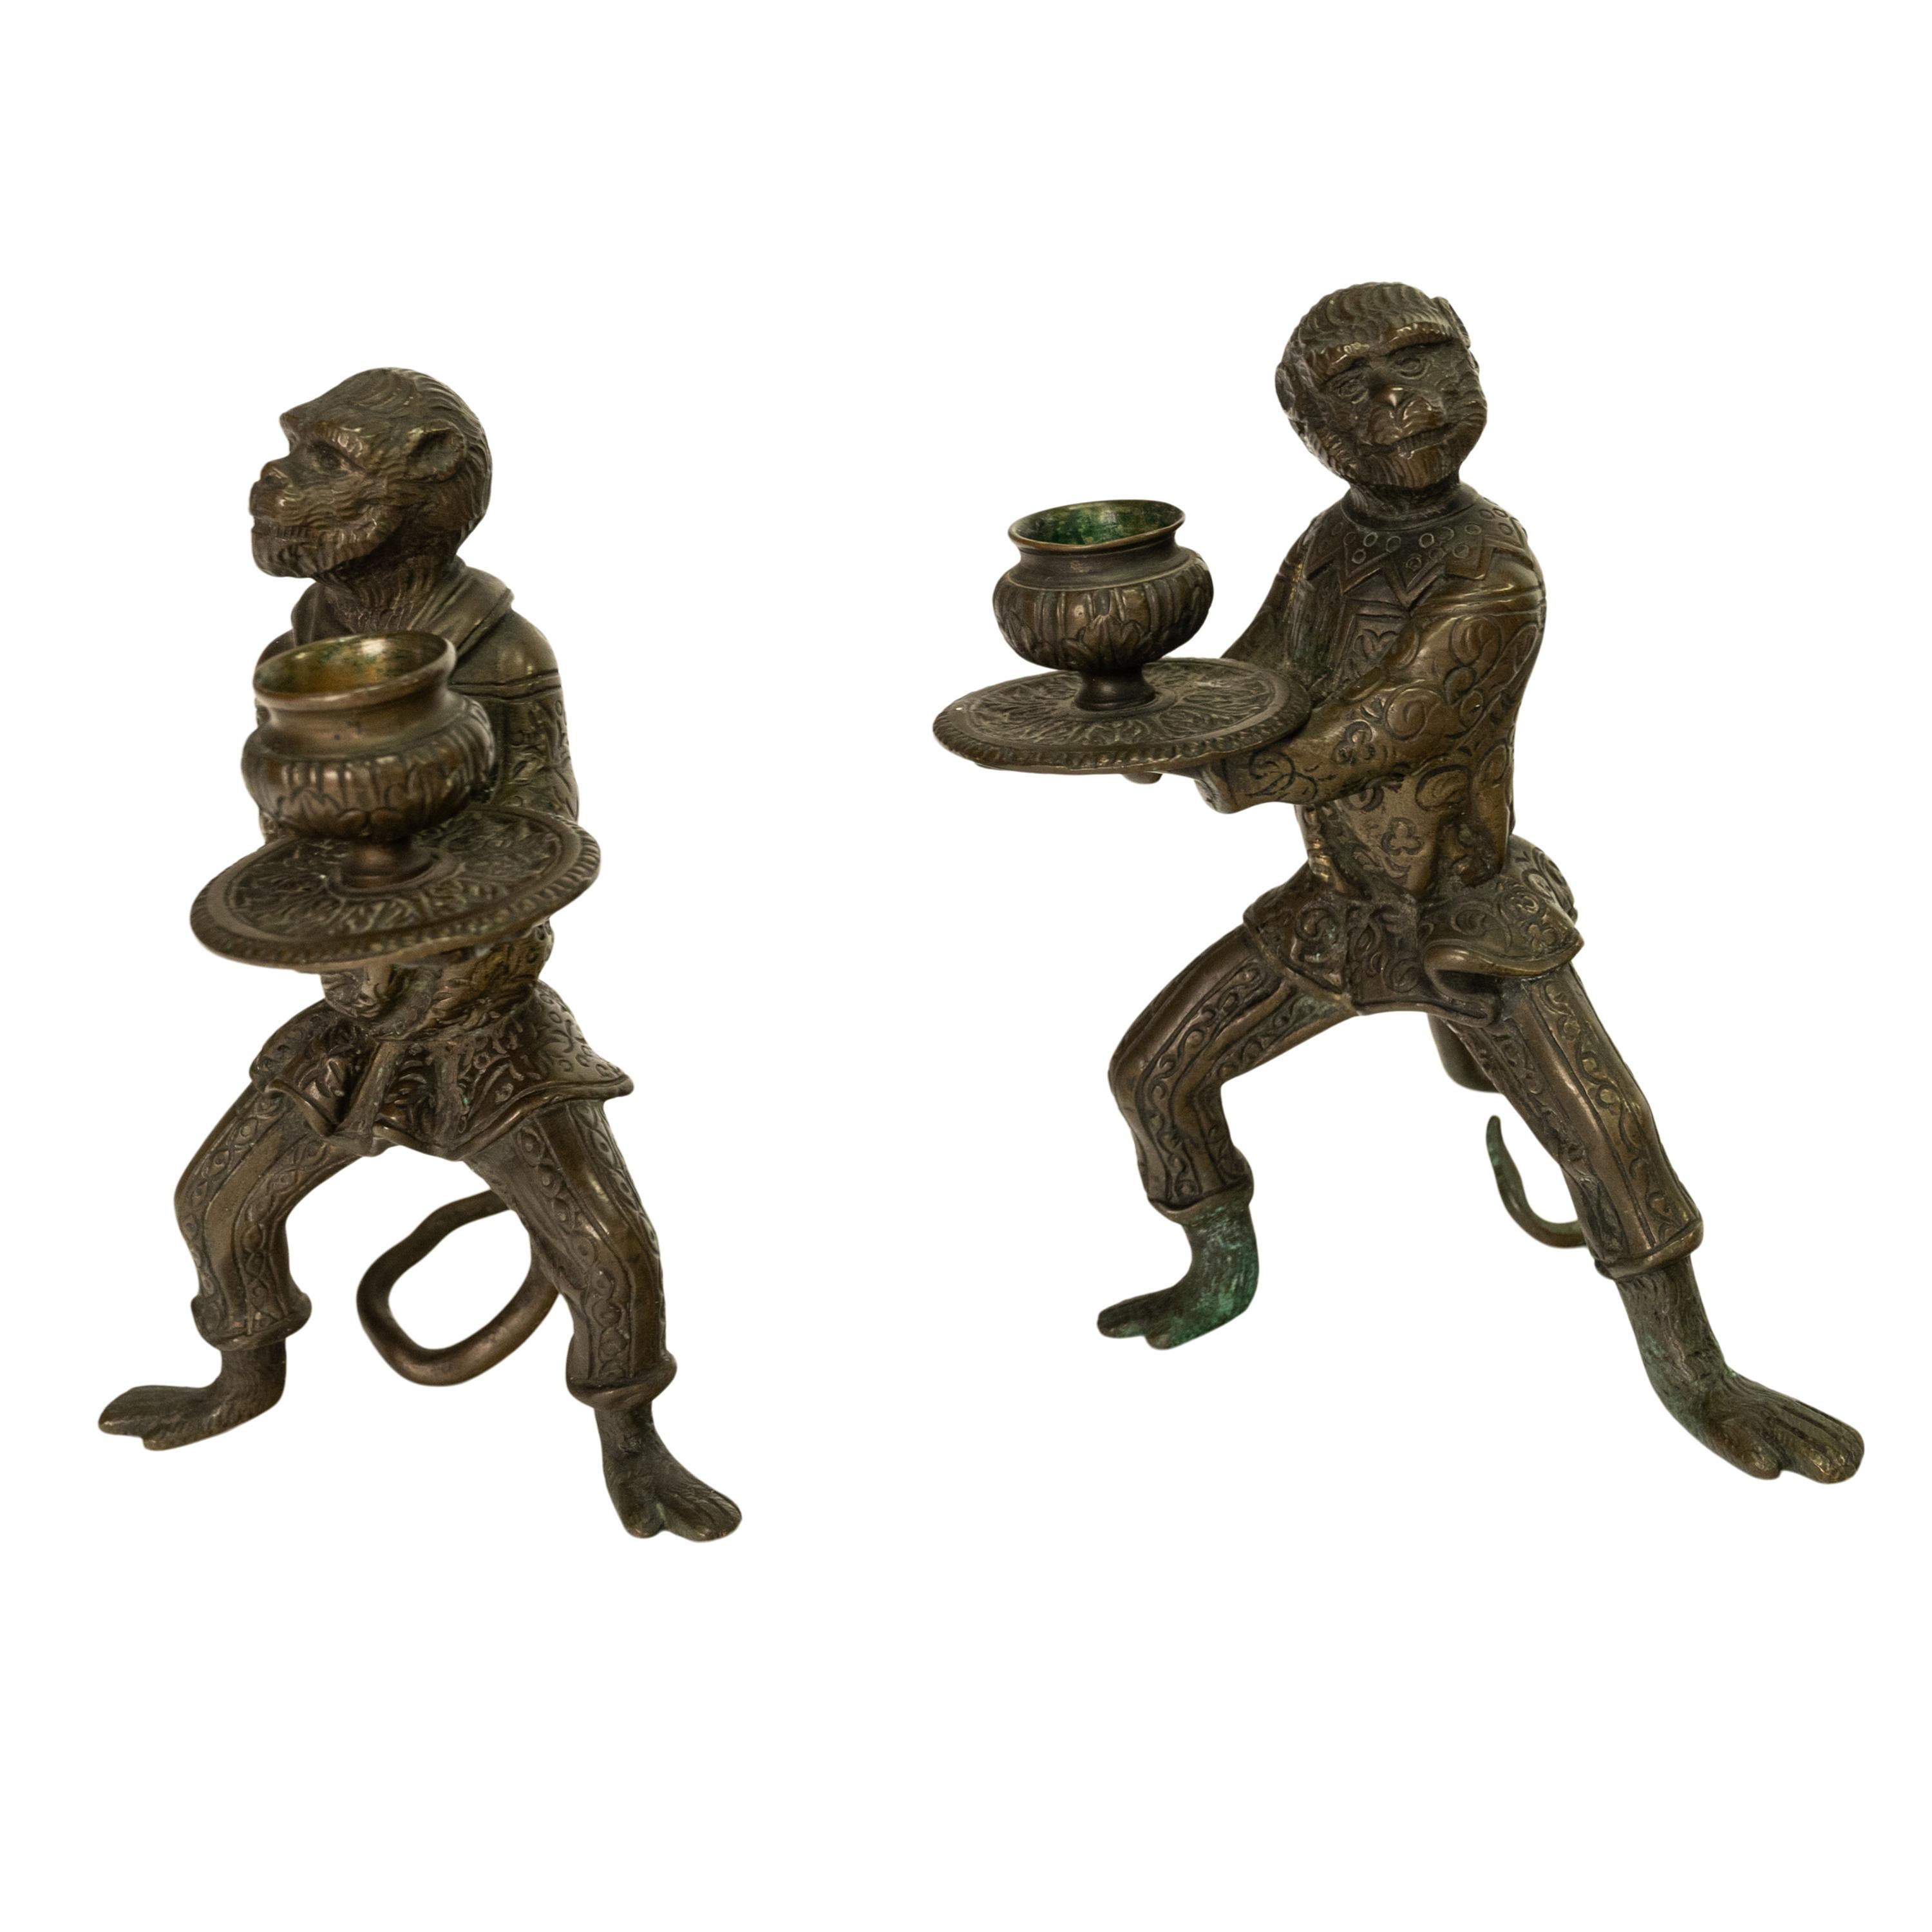 Early 20th Century Pair Antique French Bronze Figural Monkey Statue Candleholders Candlesticks 1900 For Sale